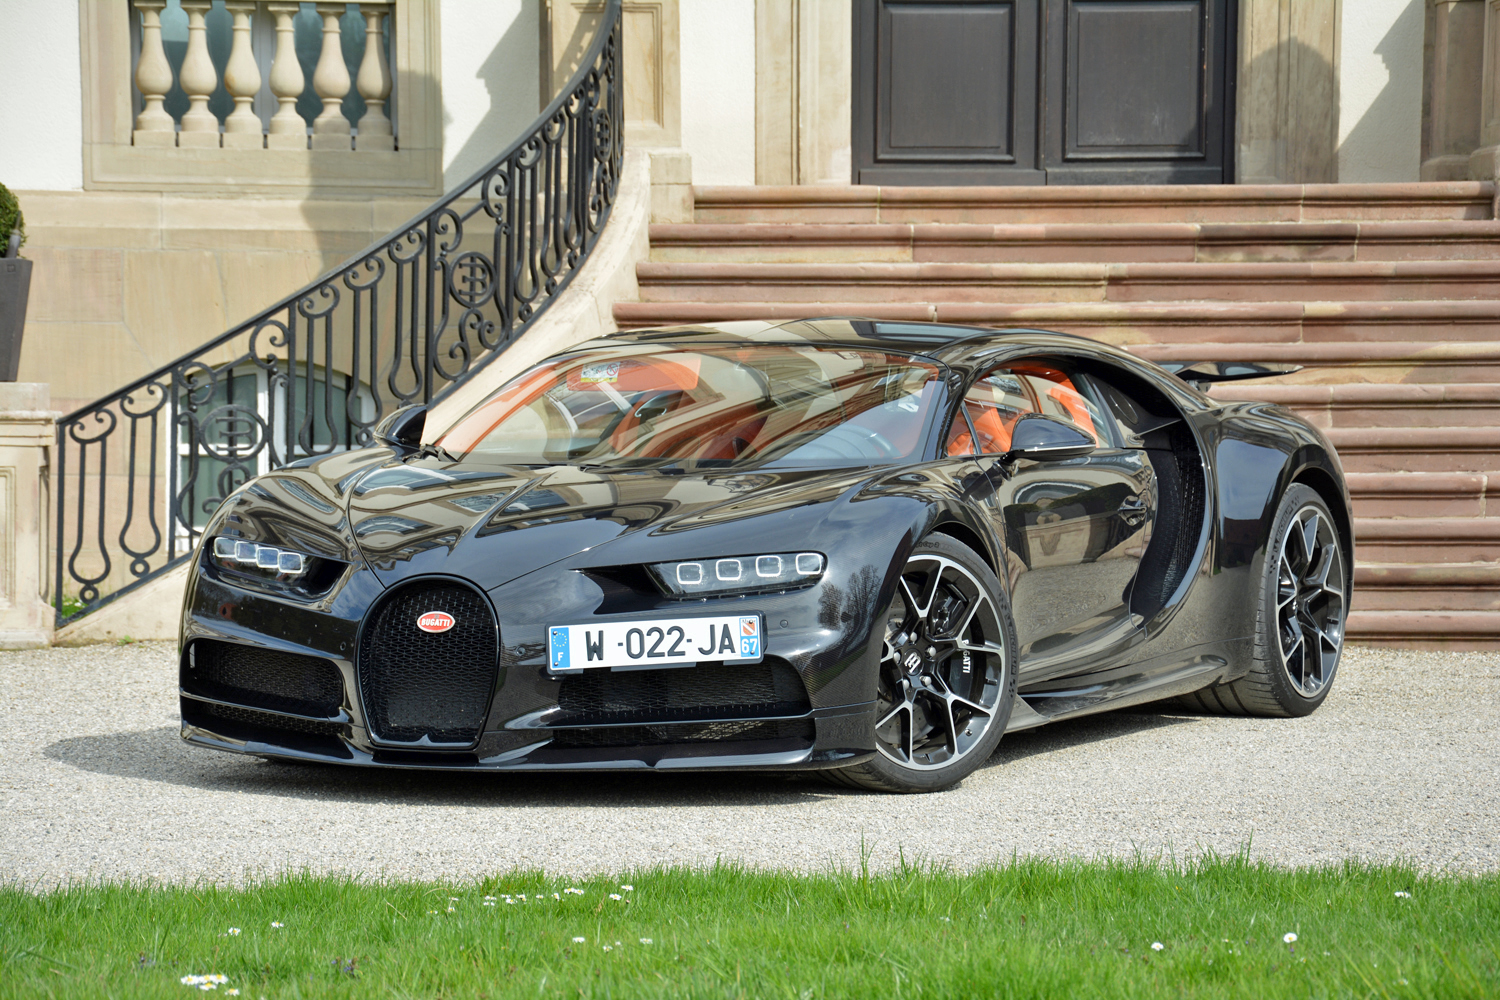 Bugatti La Voiture Noire Beats Rolls Royce Sweptail To Become The Most  Expensive Car In The World  AUTOJOSH